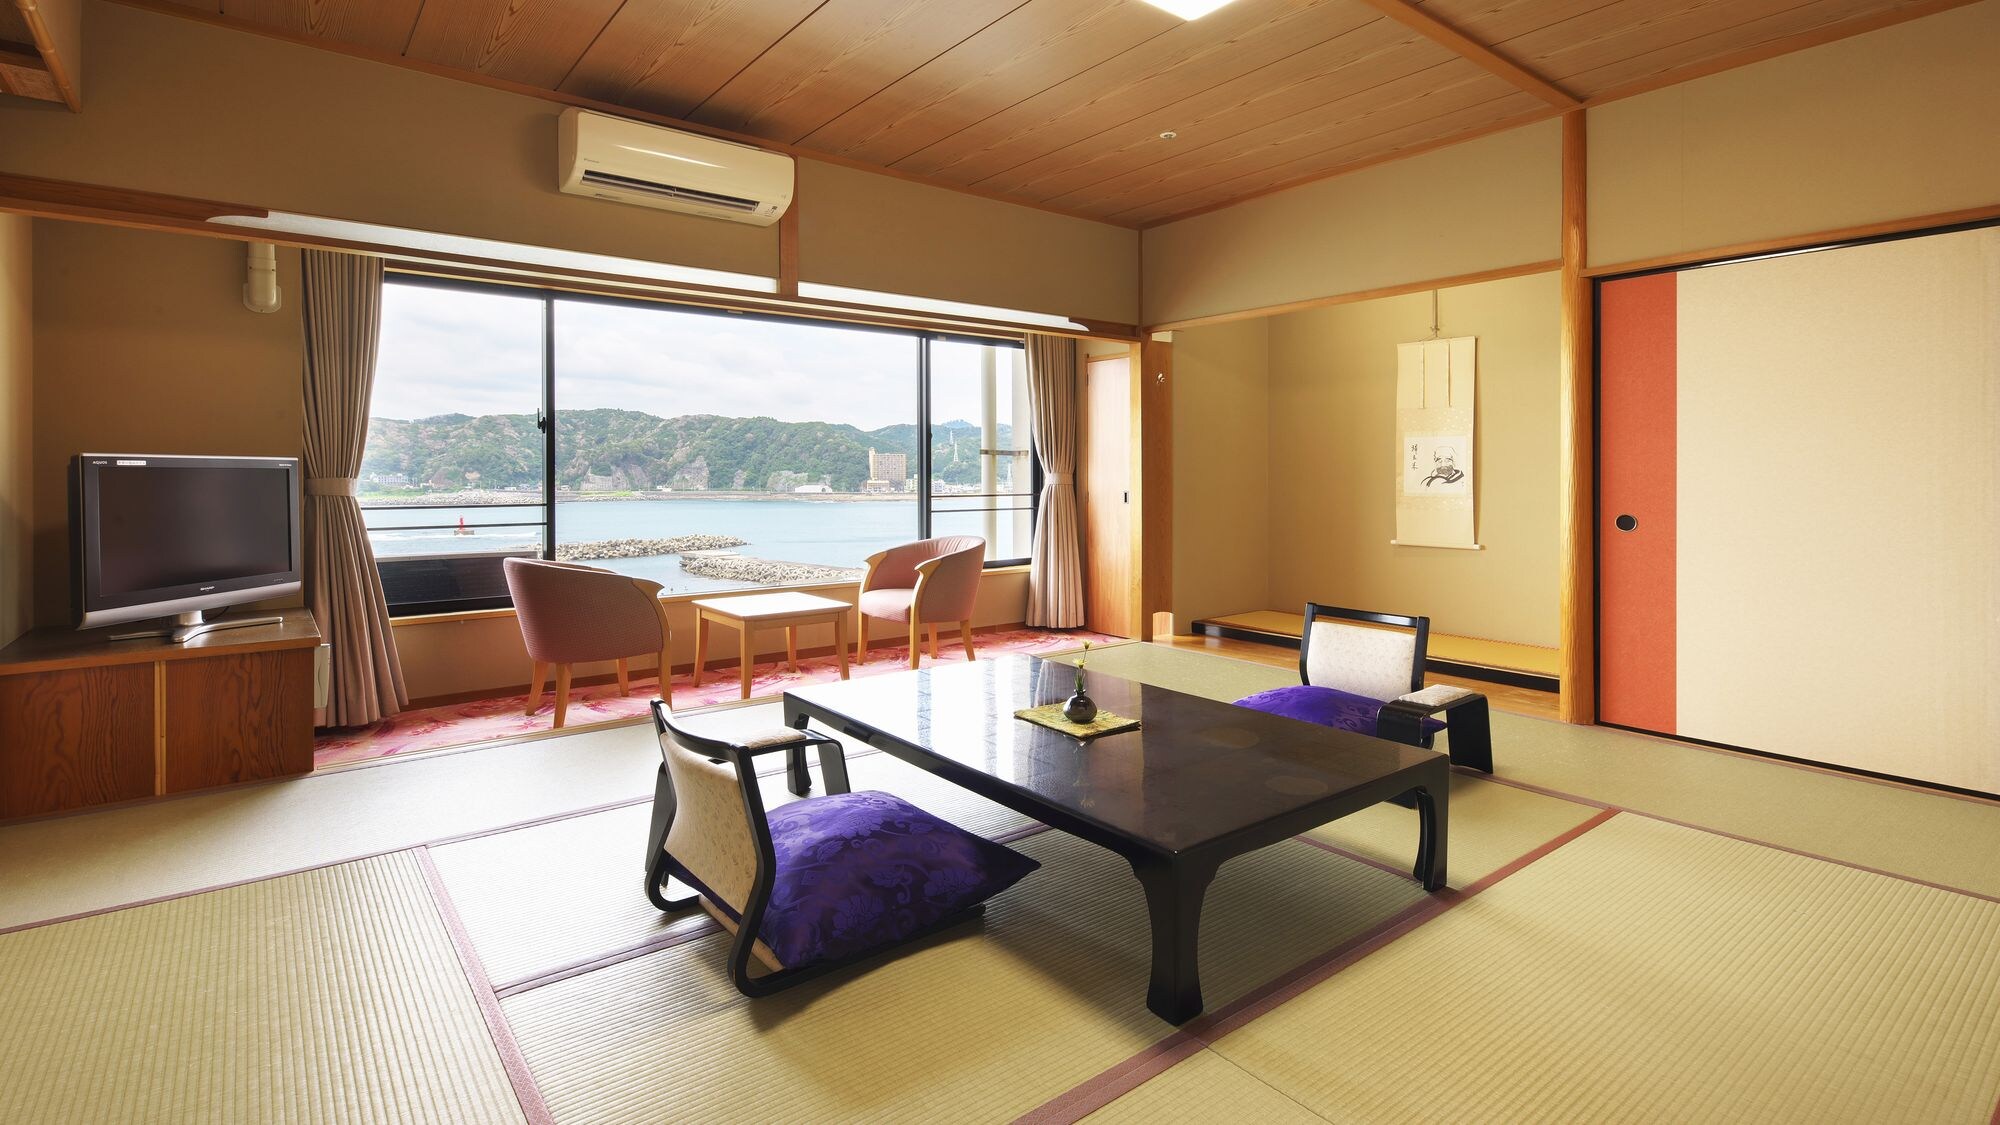  [Kichitei] Seaside Japanese-style room 12.5 tatami mats <Ocean view> We offer a warm Japanese-style room type.